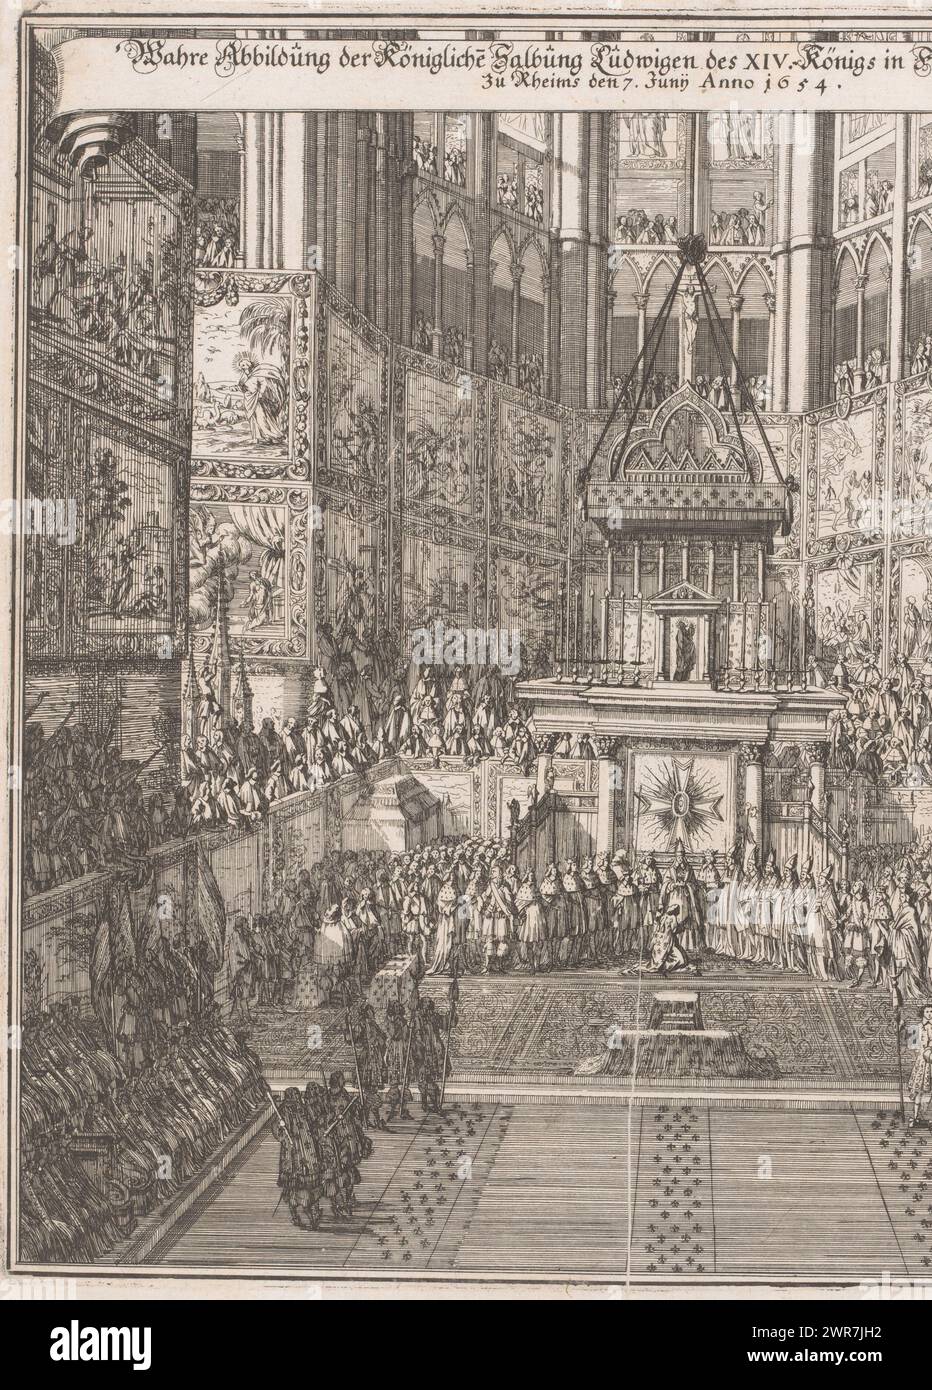 Coronation of Louis XIV in the Cathedral of Reims, Wahre Abbildung der Königliche salbung Ludwigen des, print maker: anonymous, 1654, paper, engraving, height 263 mm × width 272 mm, print Stock Photo